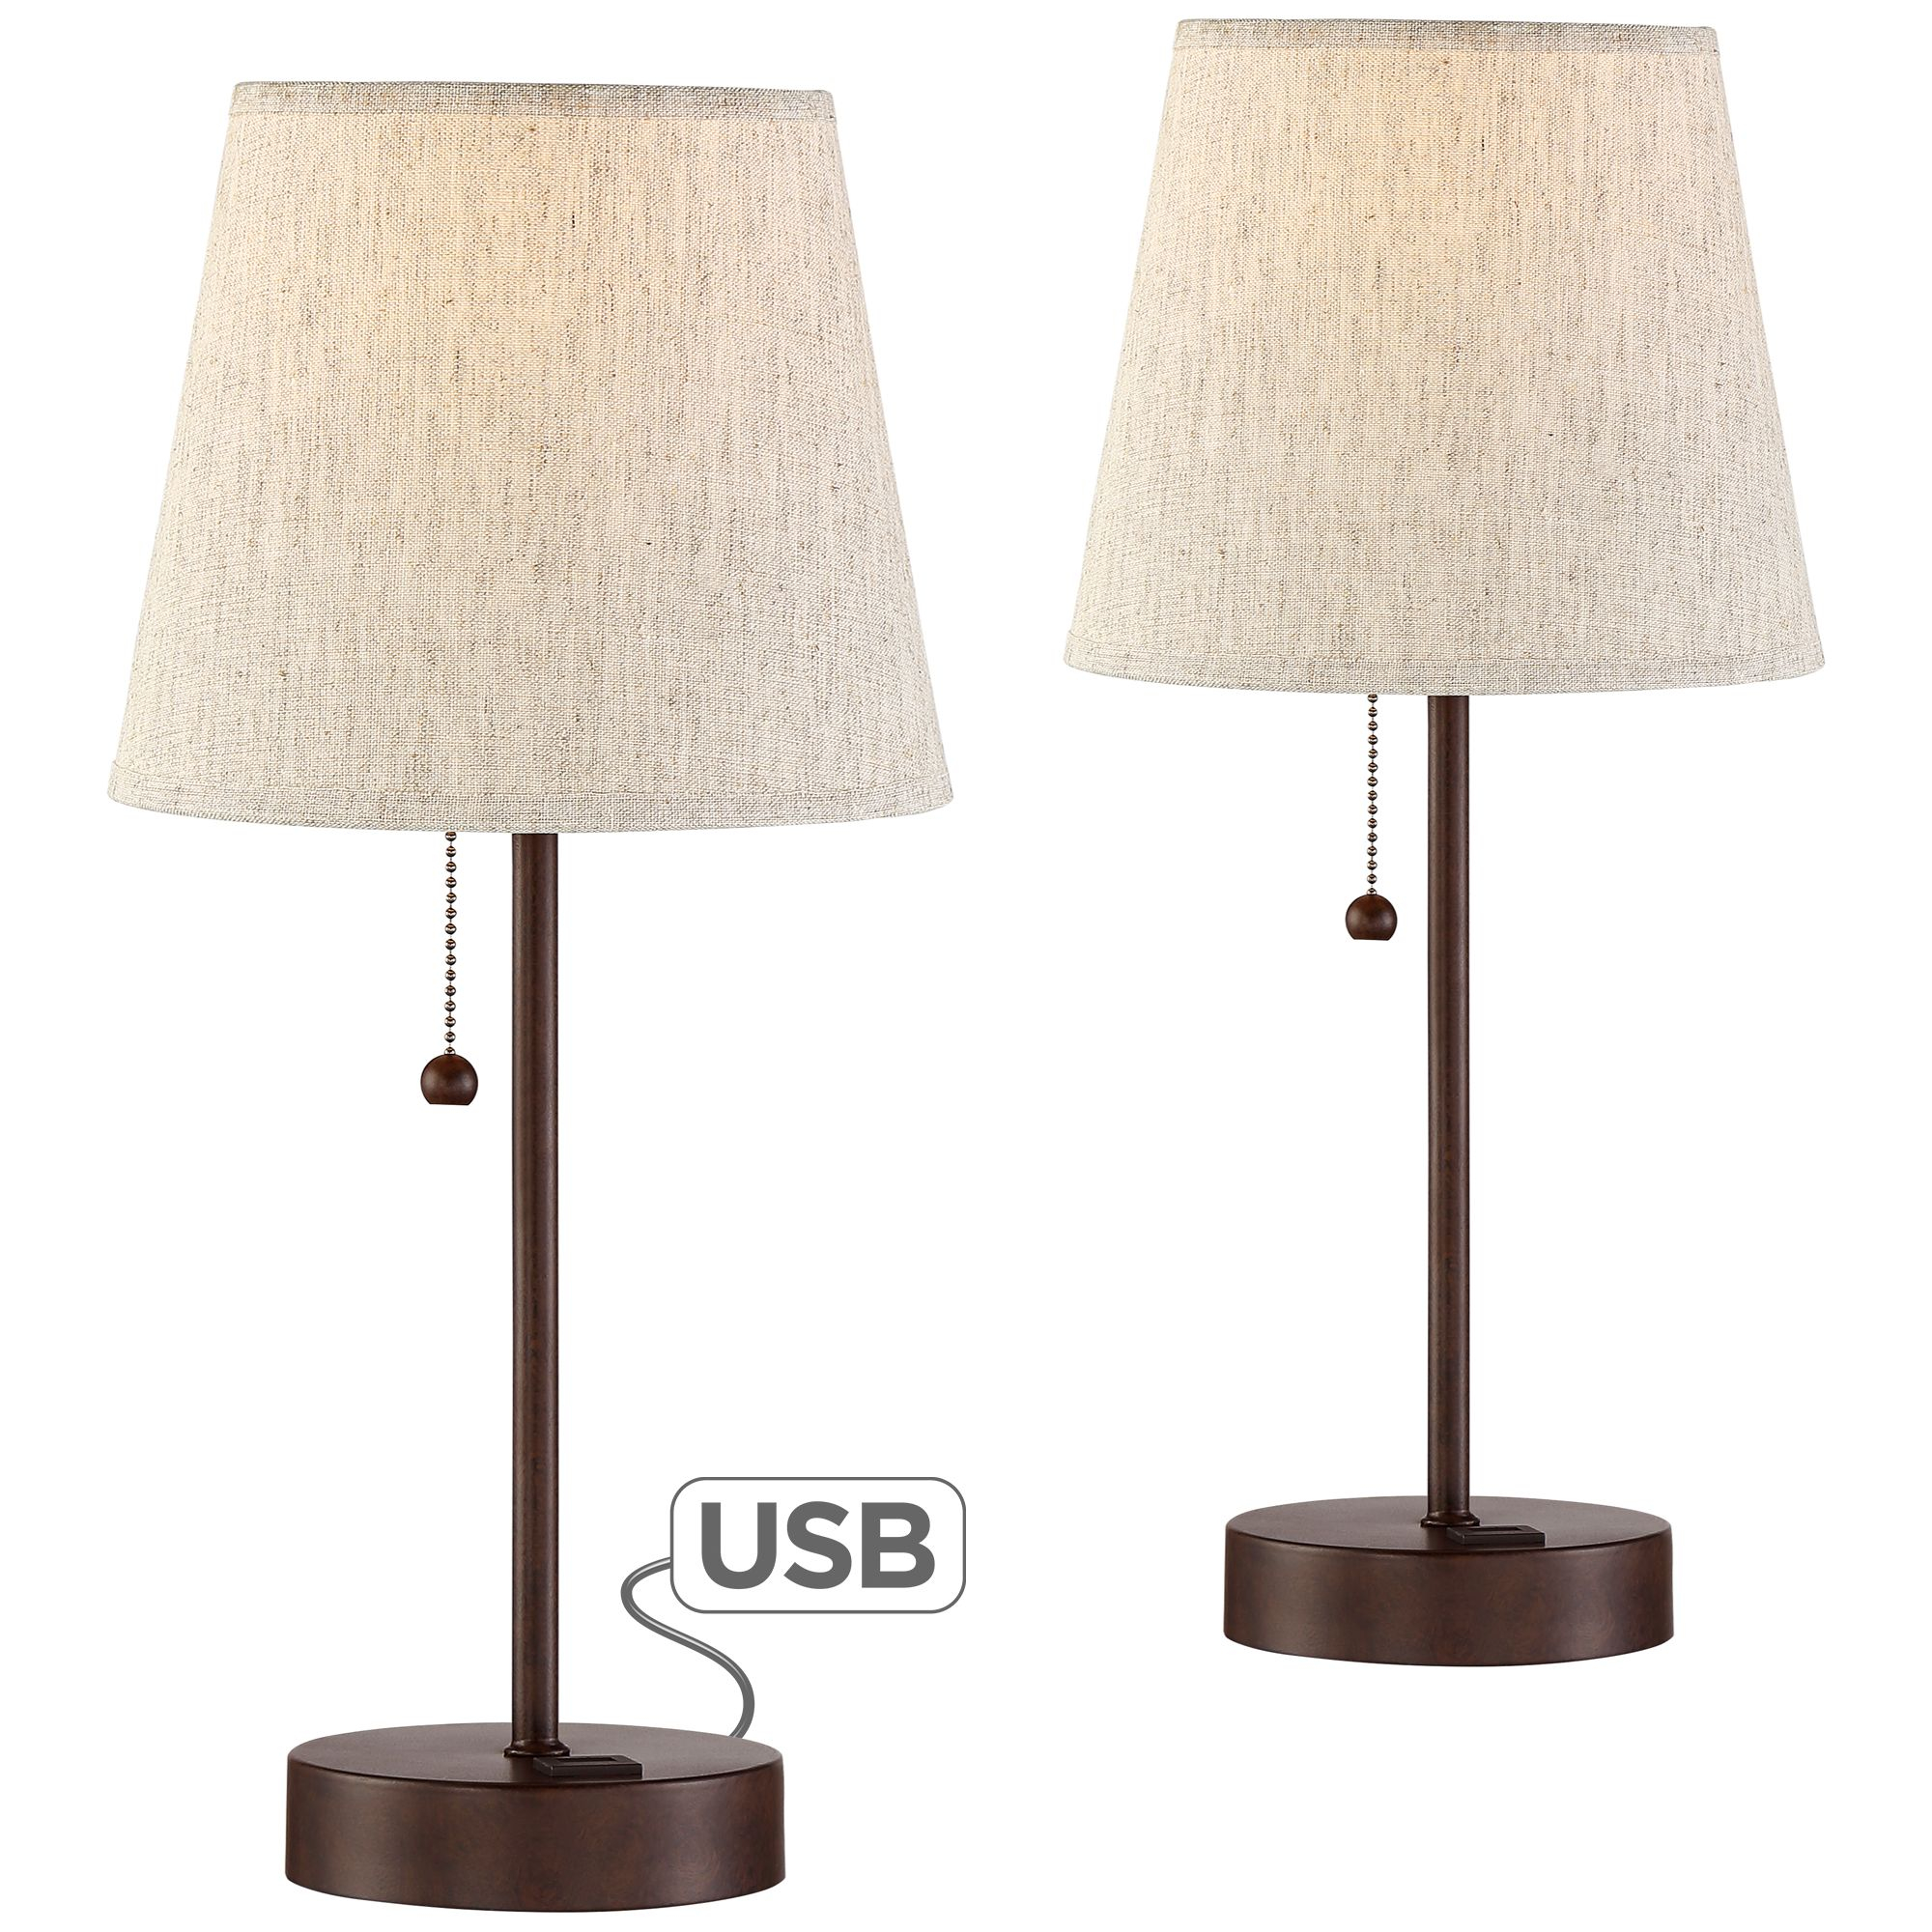 360 Lighting Modern Accent Table Lamps 18 14 High Set Of 2 With Hotel Style Usb Charging Port Bronze Metal Drum Shade For Bedroom Bedside with size 2000 X 2000